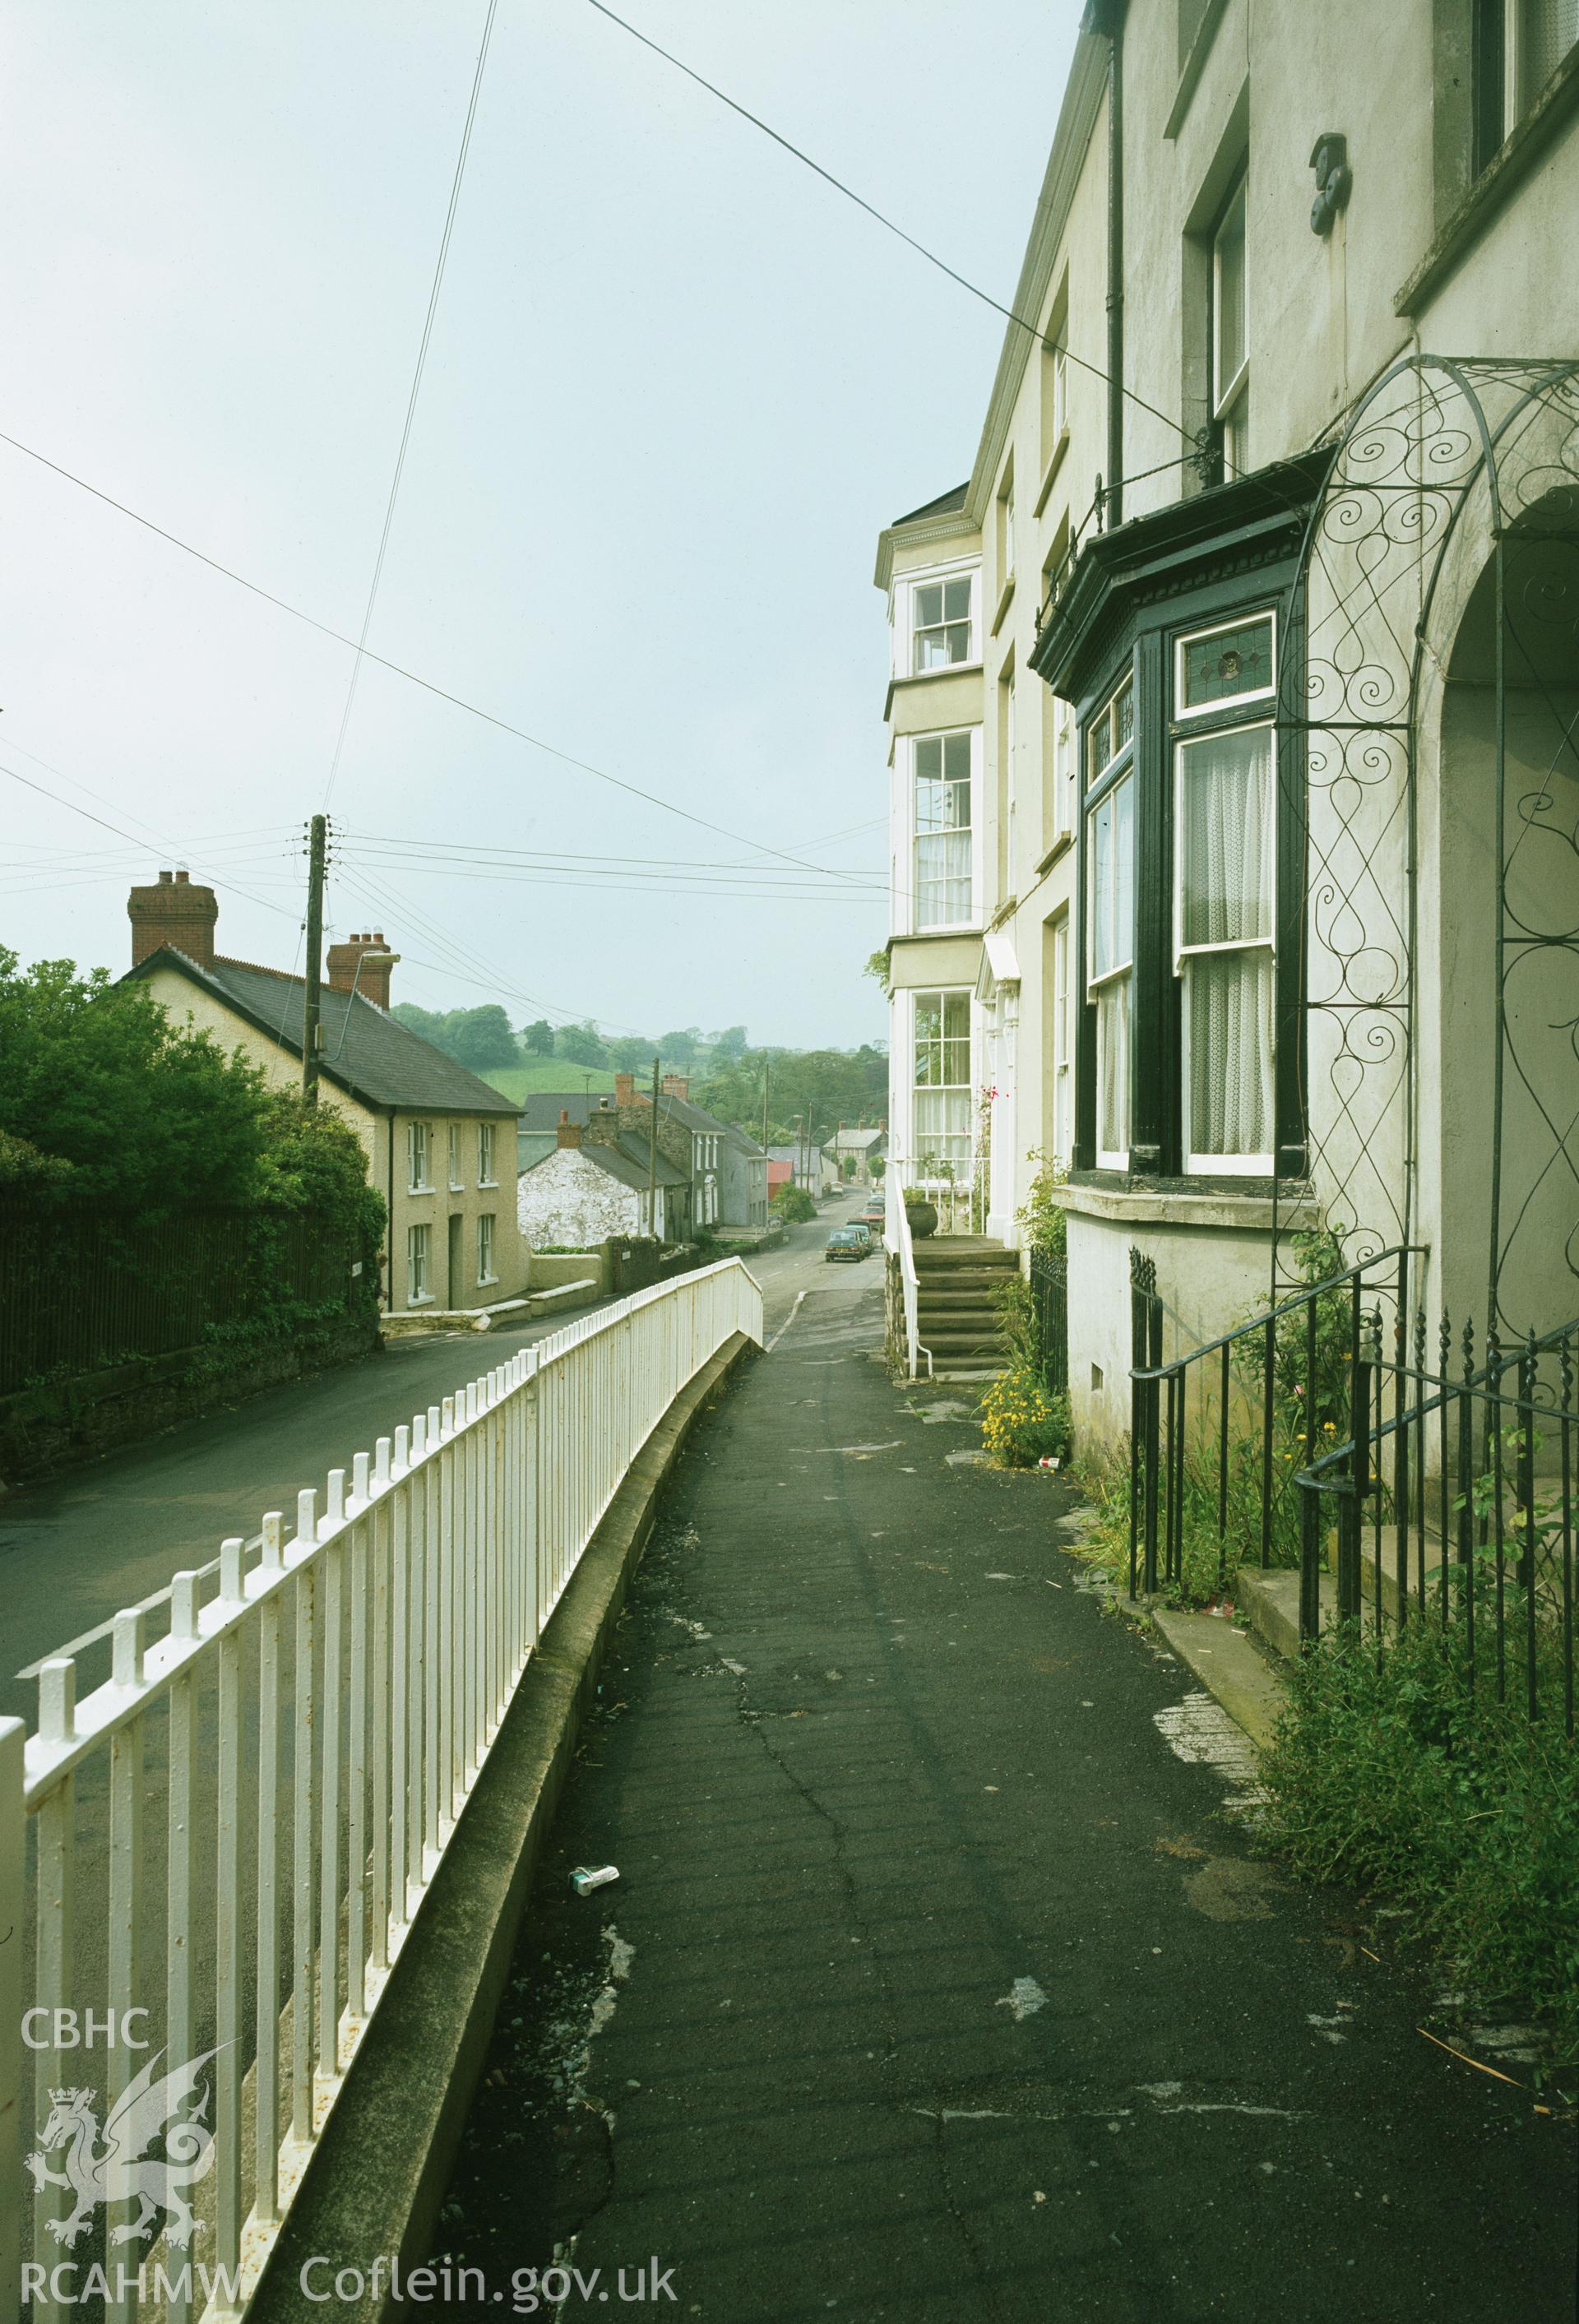 RCAHMW colour transparency of The Limes, King Street, Laugharne, taken by Iain Wright, 1979